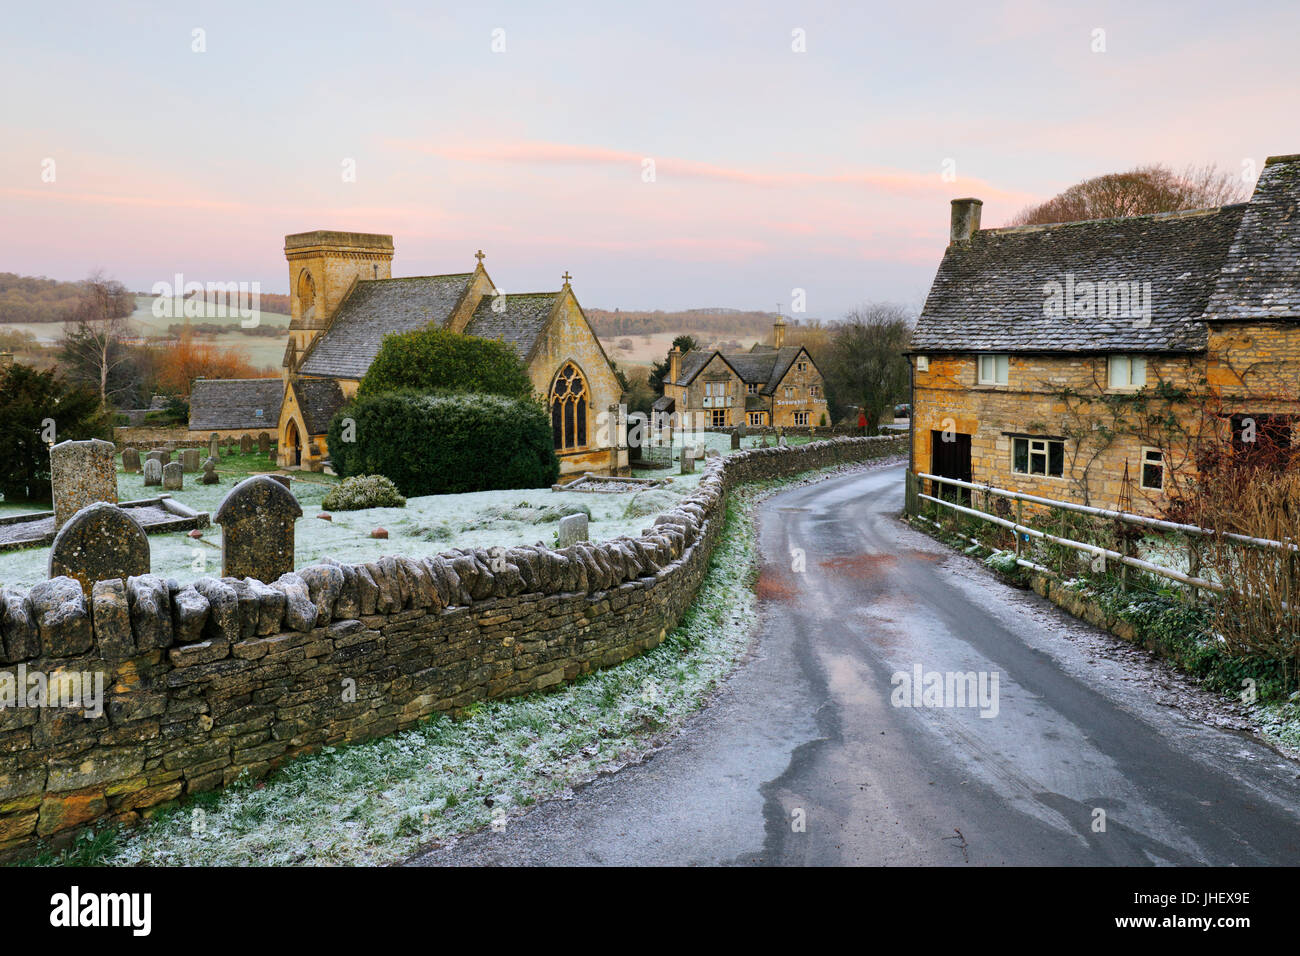 St Barnabas Church et Cotswold stone cottages en hiver gel, Snowshill, Cotswolds, Gloucestershire, Angleterre, Royaume-Uni, Europe Banque D'Images